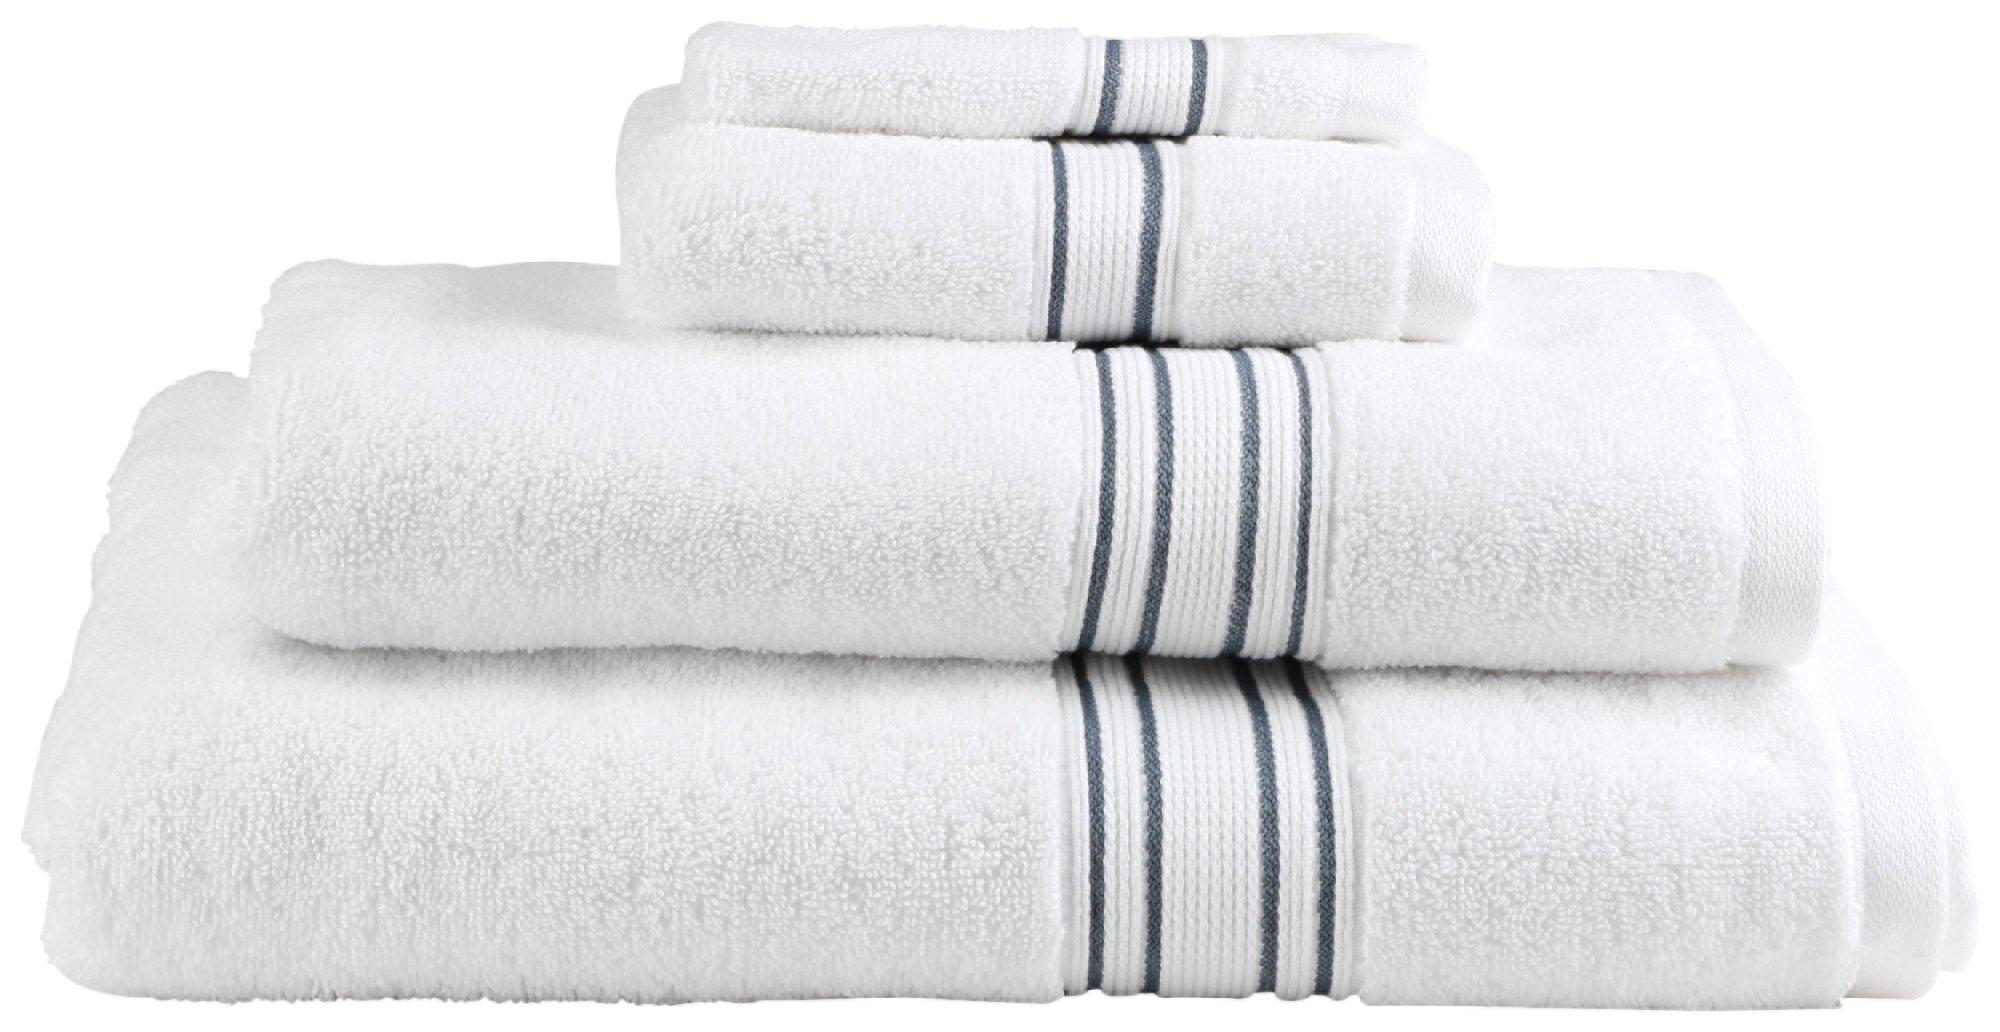 Weft Insert Towel Collection